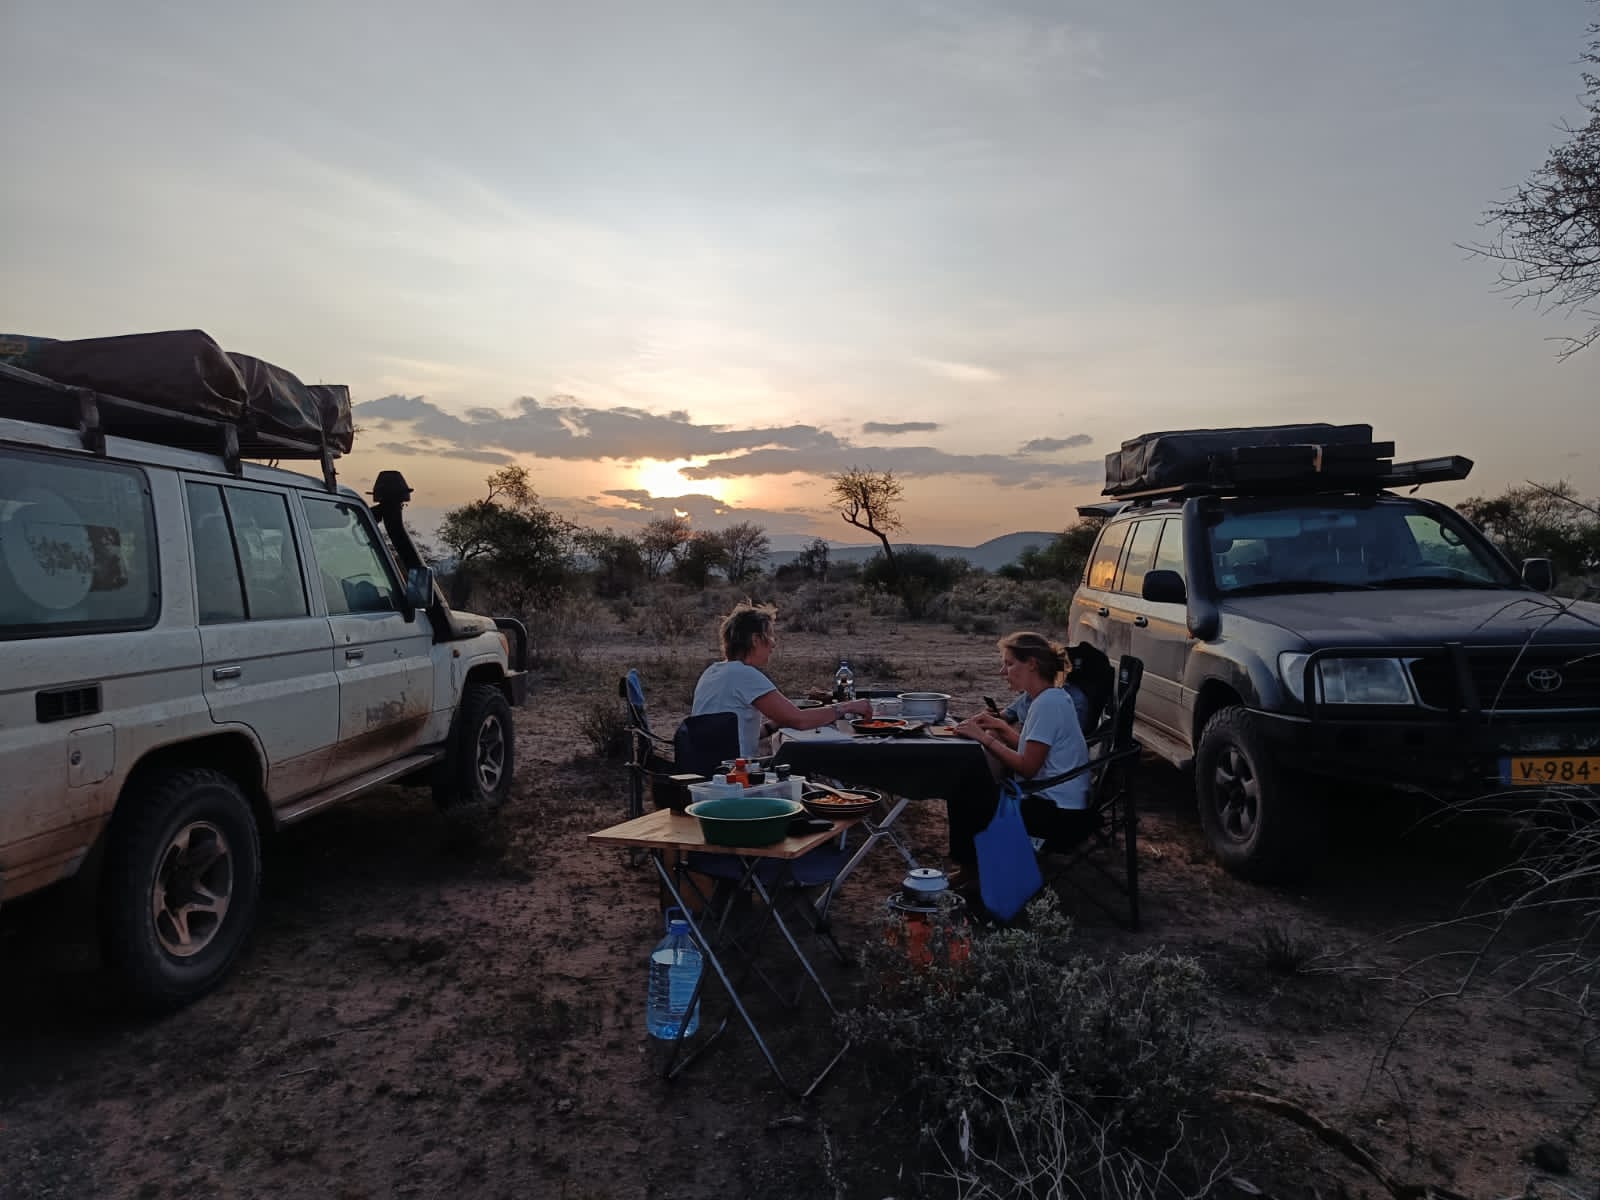 camping safari on east Africa for holiday